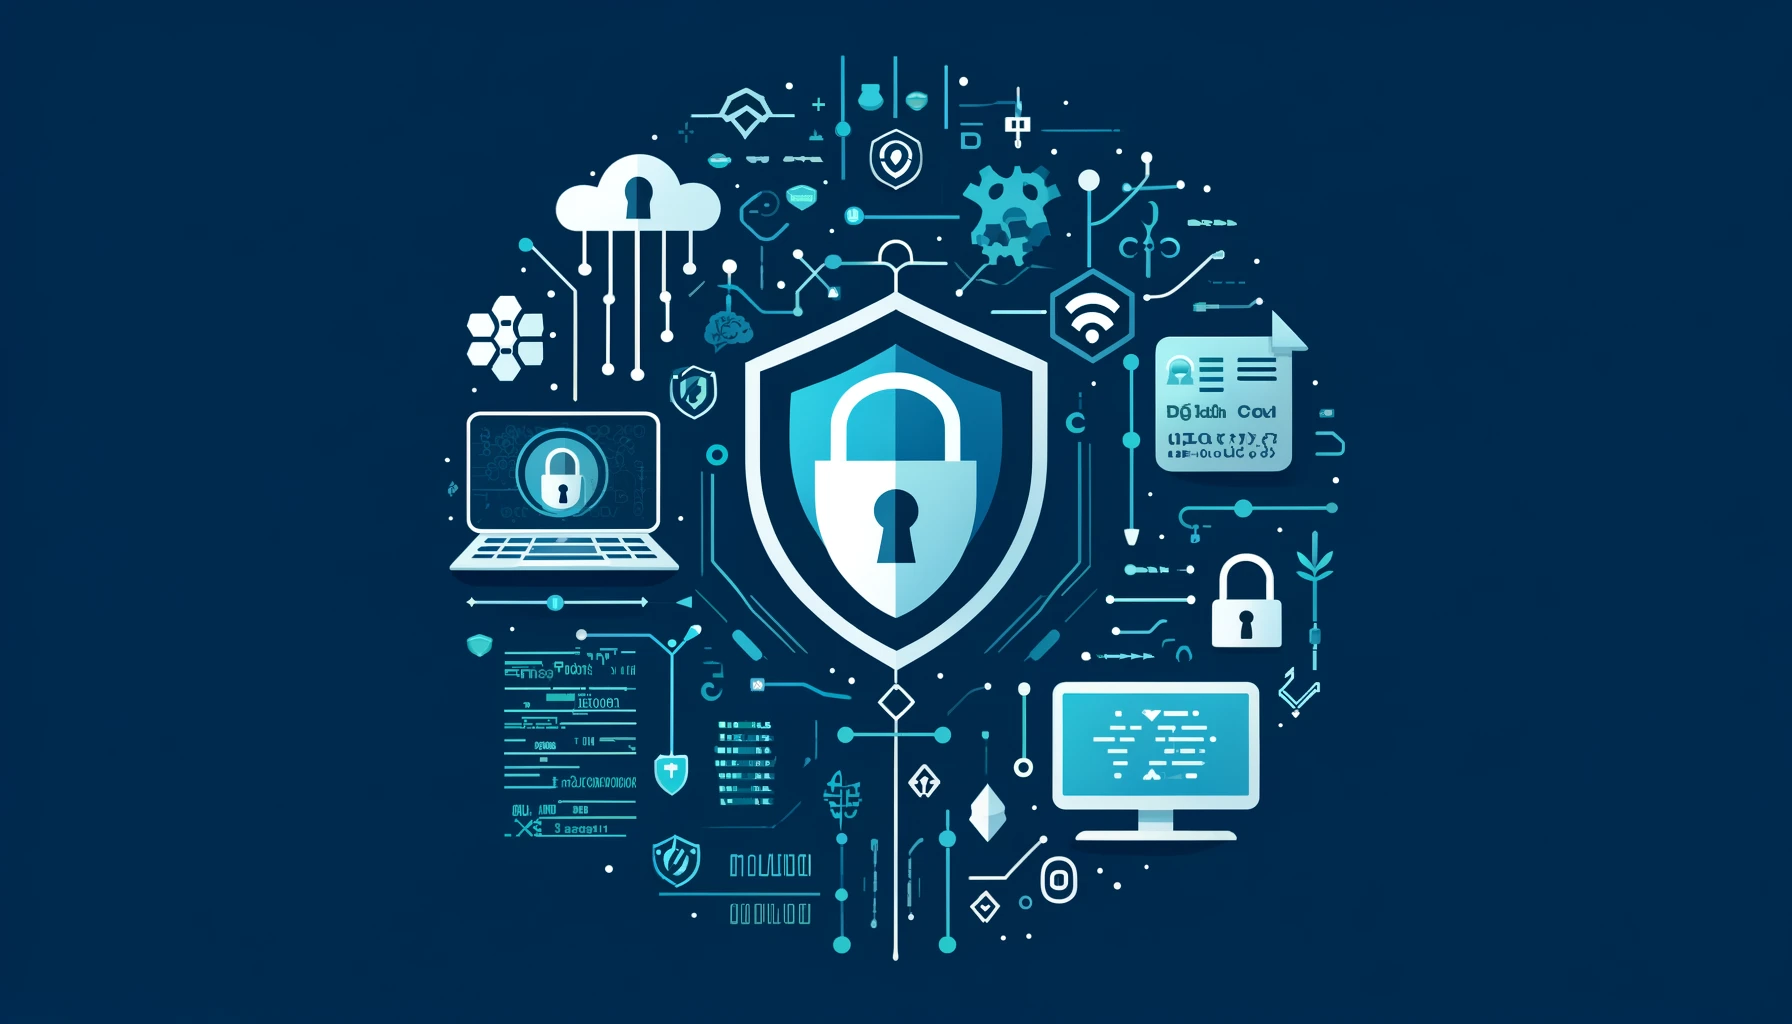 Create a 16:9 image that visually represents the concept of cybersecurity. The image should include symbols like a shield, a lock, digital code, and a computer, to symbolize protection against cyber threats. The design should be approachable and understandable to a general audience, with a balance between technical symbolism and a clear, engaging visual representation. The color scheme should include blues and greens to convey a sense of security and digital technology.